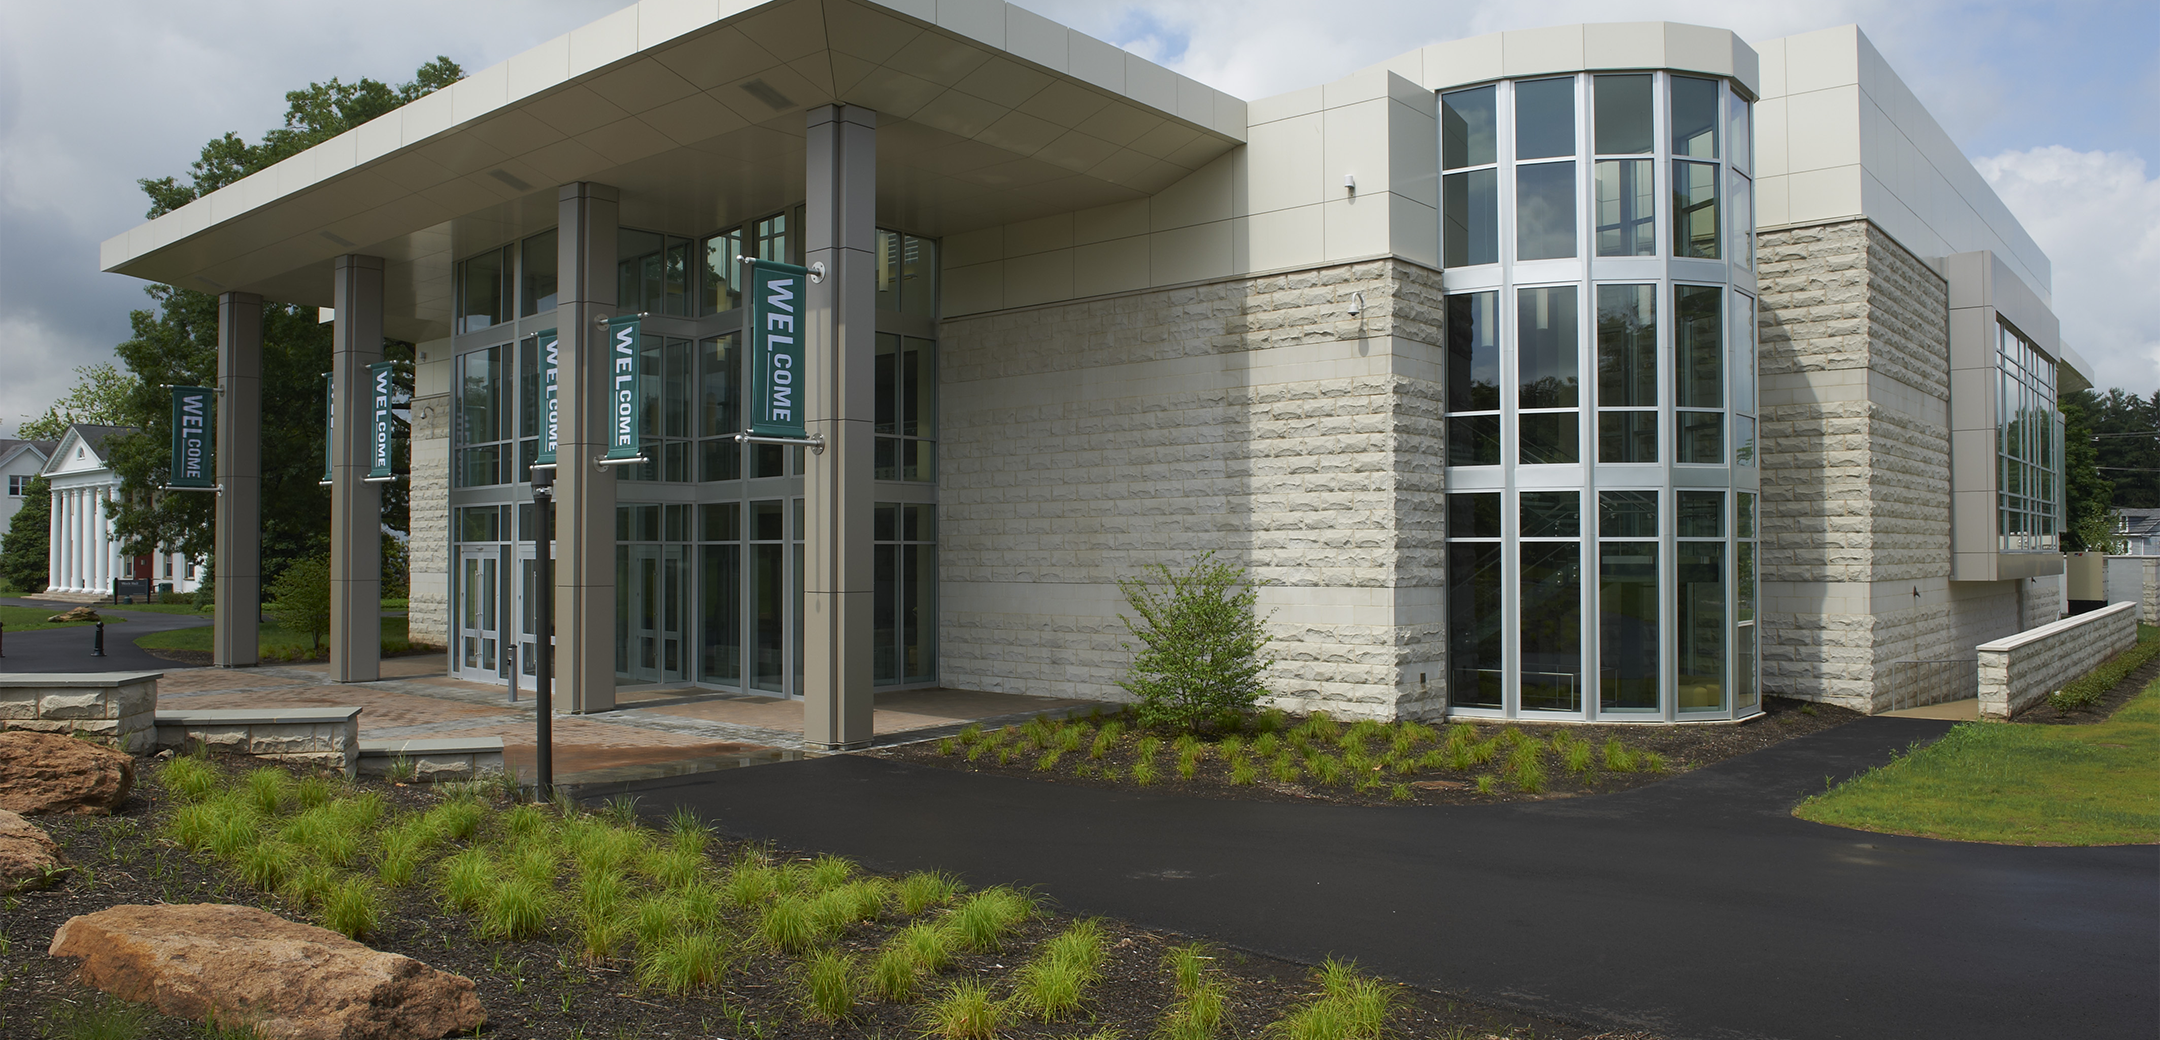 A close up view of the Delaware Valley College showcasing the rounded, floor to ceiling glass corner design and glass front entrance.